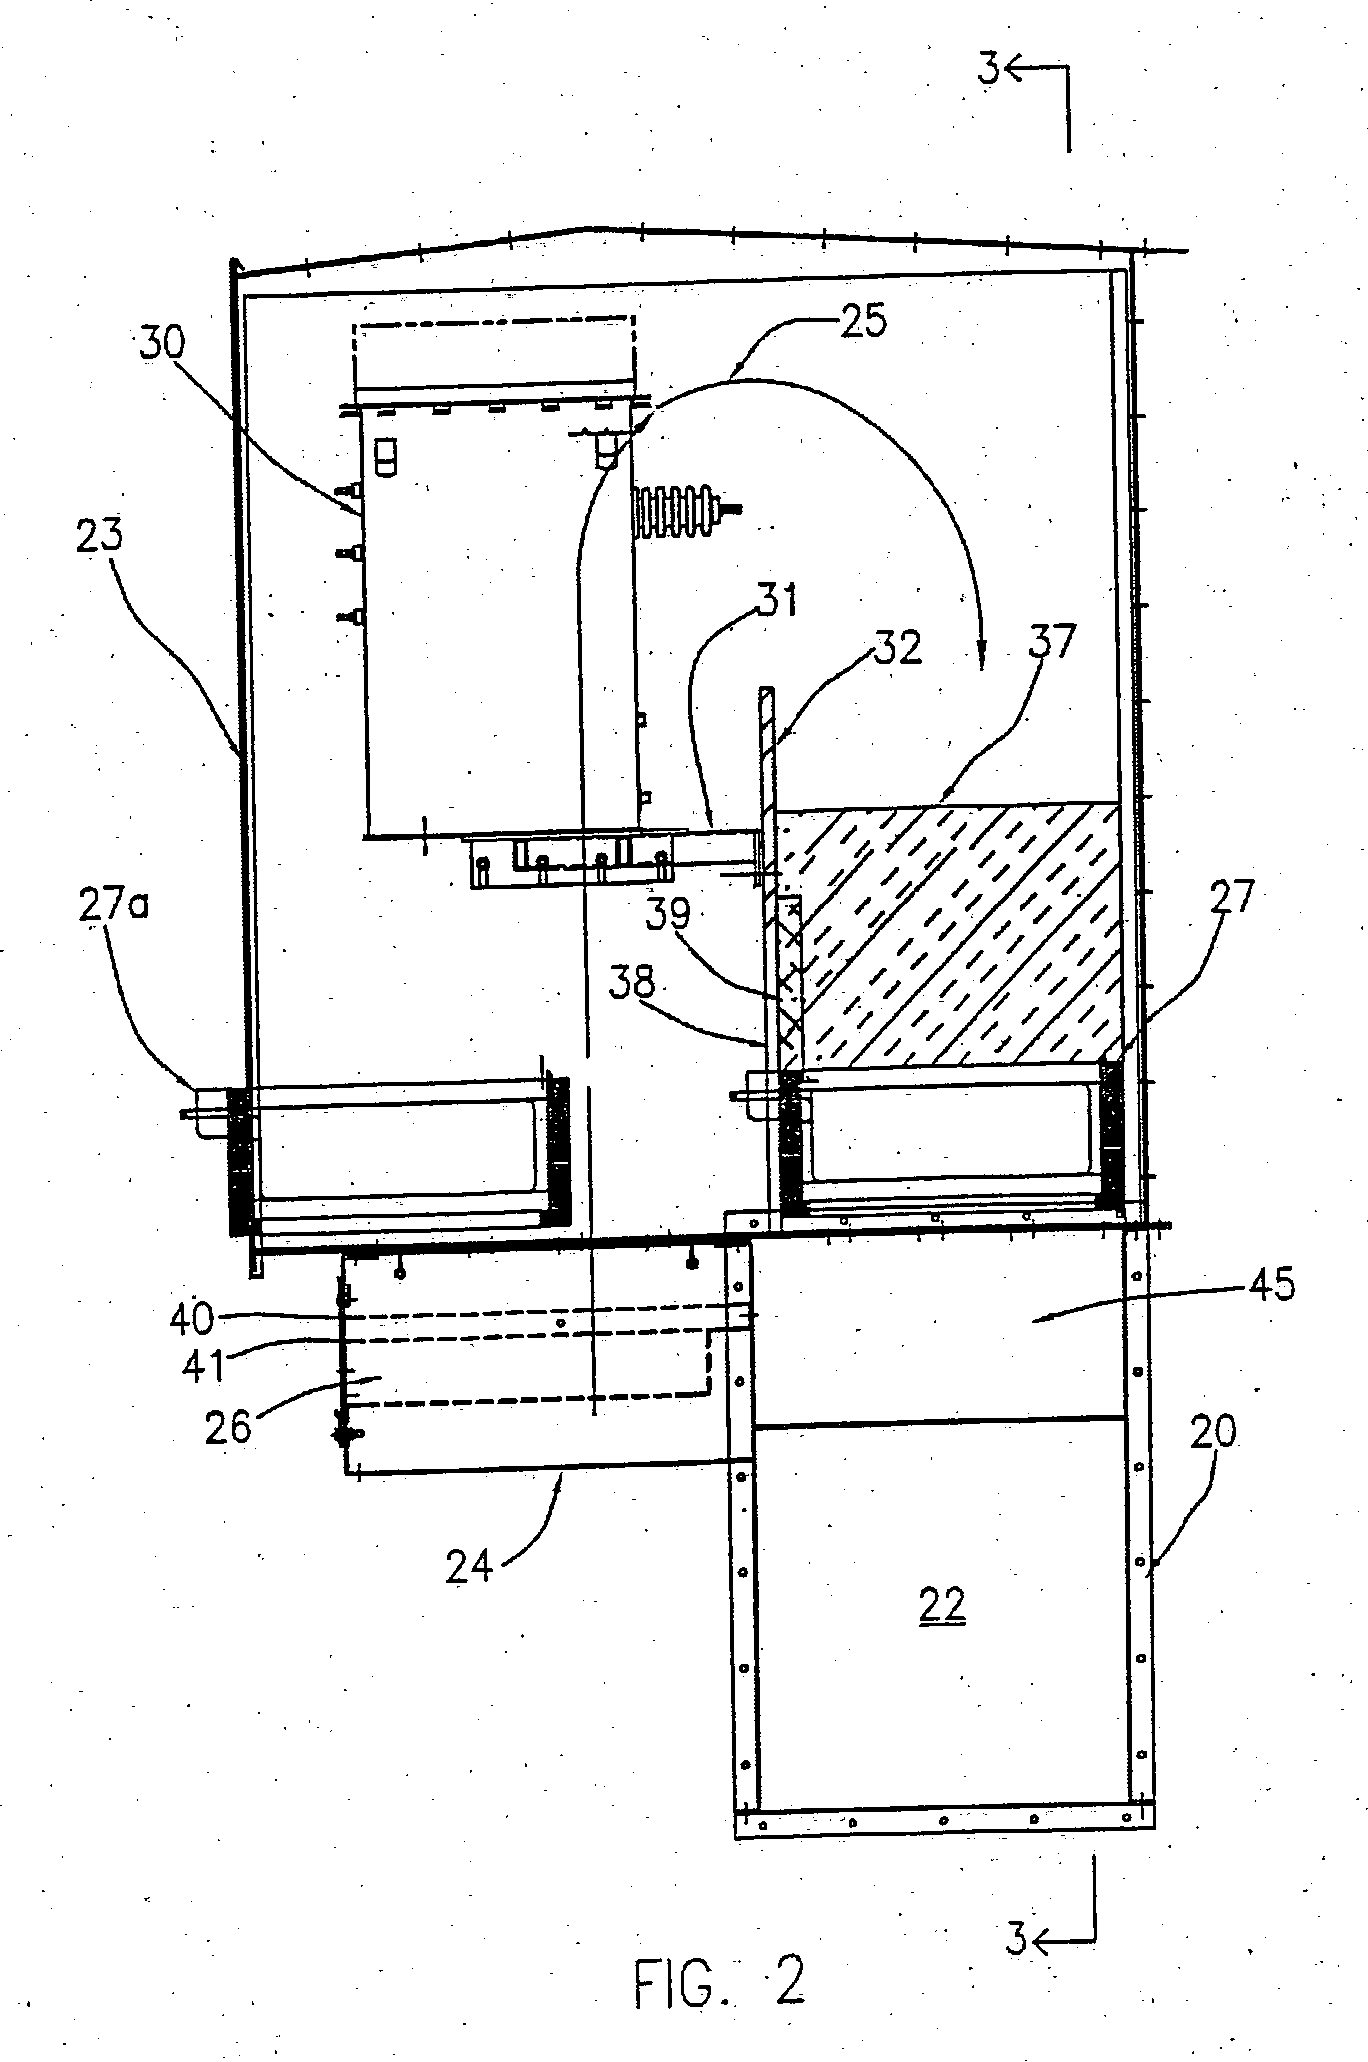 Apparatus and method for the treatment of odor and volatile organic compound contaminants in air emissions